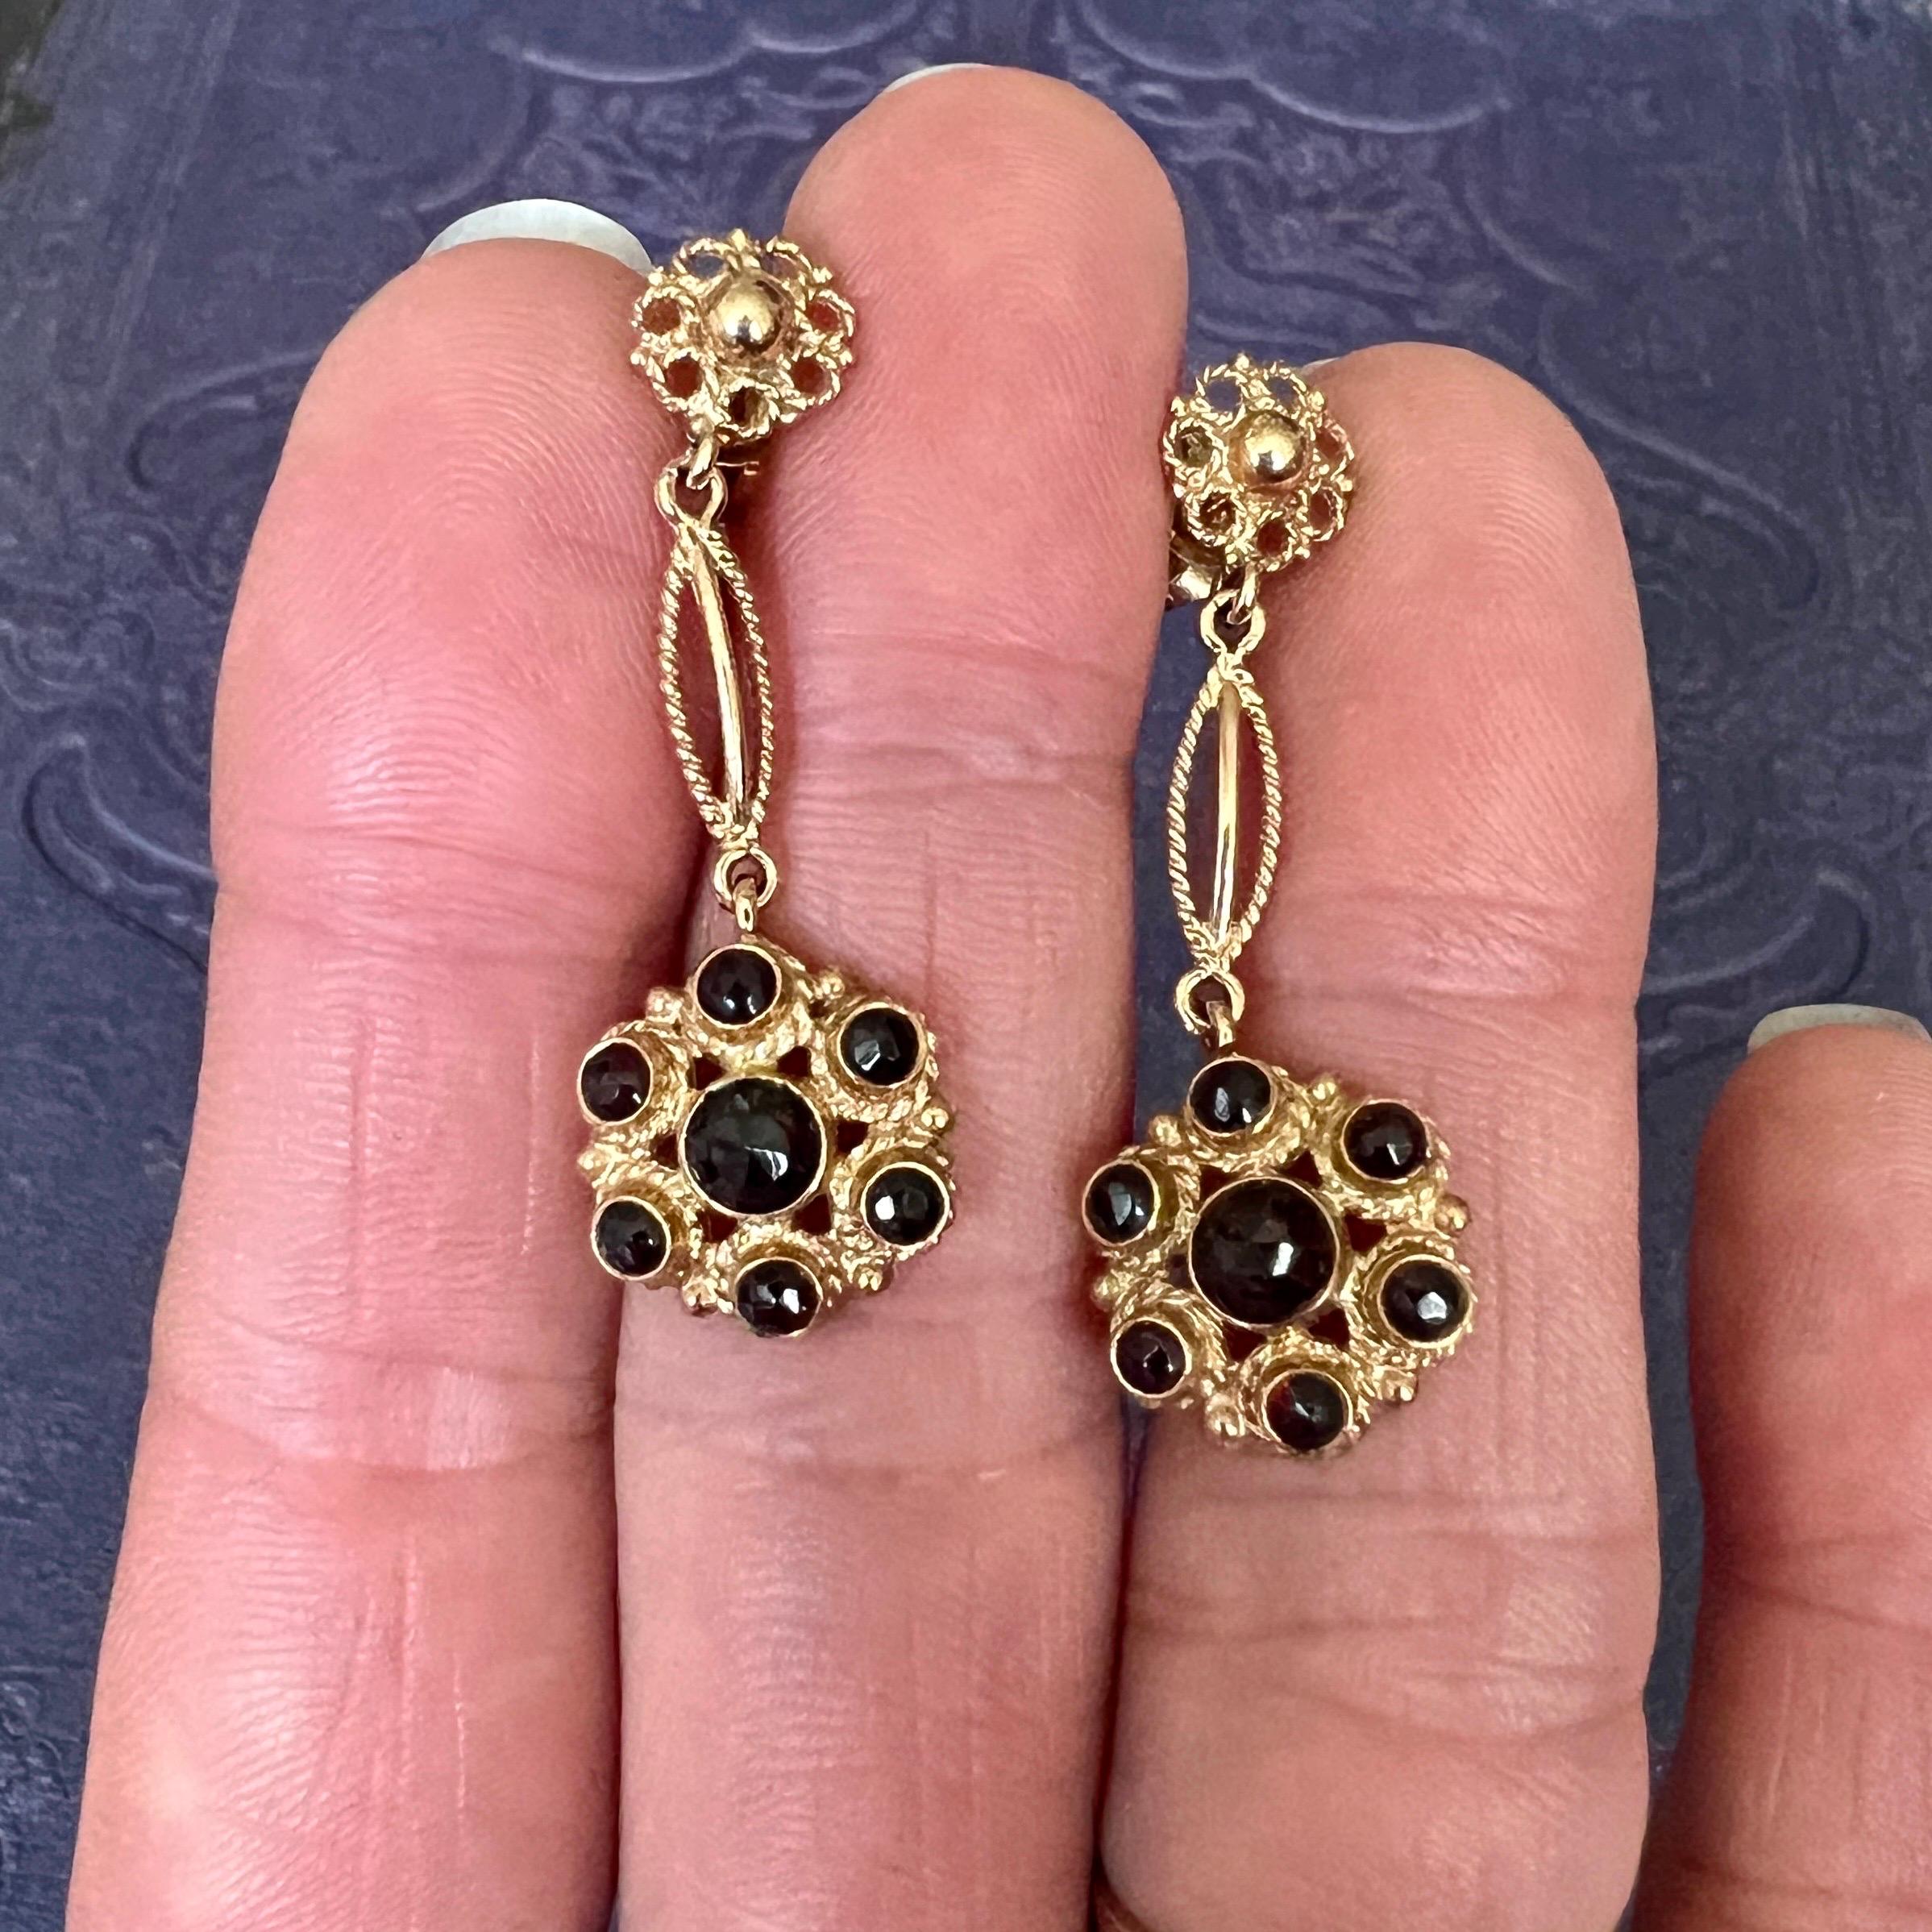 Pair of 14 karat yellow gold dangle earrings set with six faceted red garnets. The garnet stones are clustered around the center stone and bezel set. They are adorned with rope motif and granulation on the sides. The earpieces are also made of rope